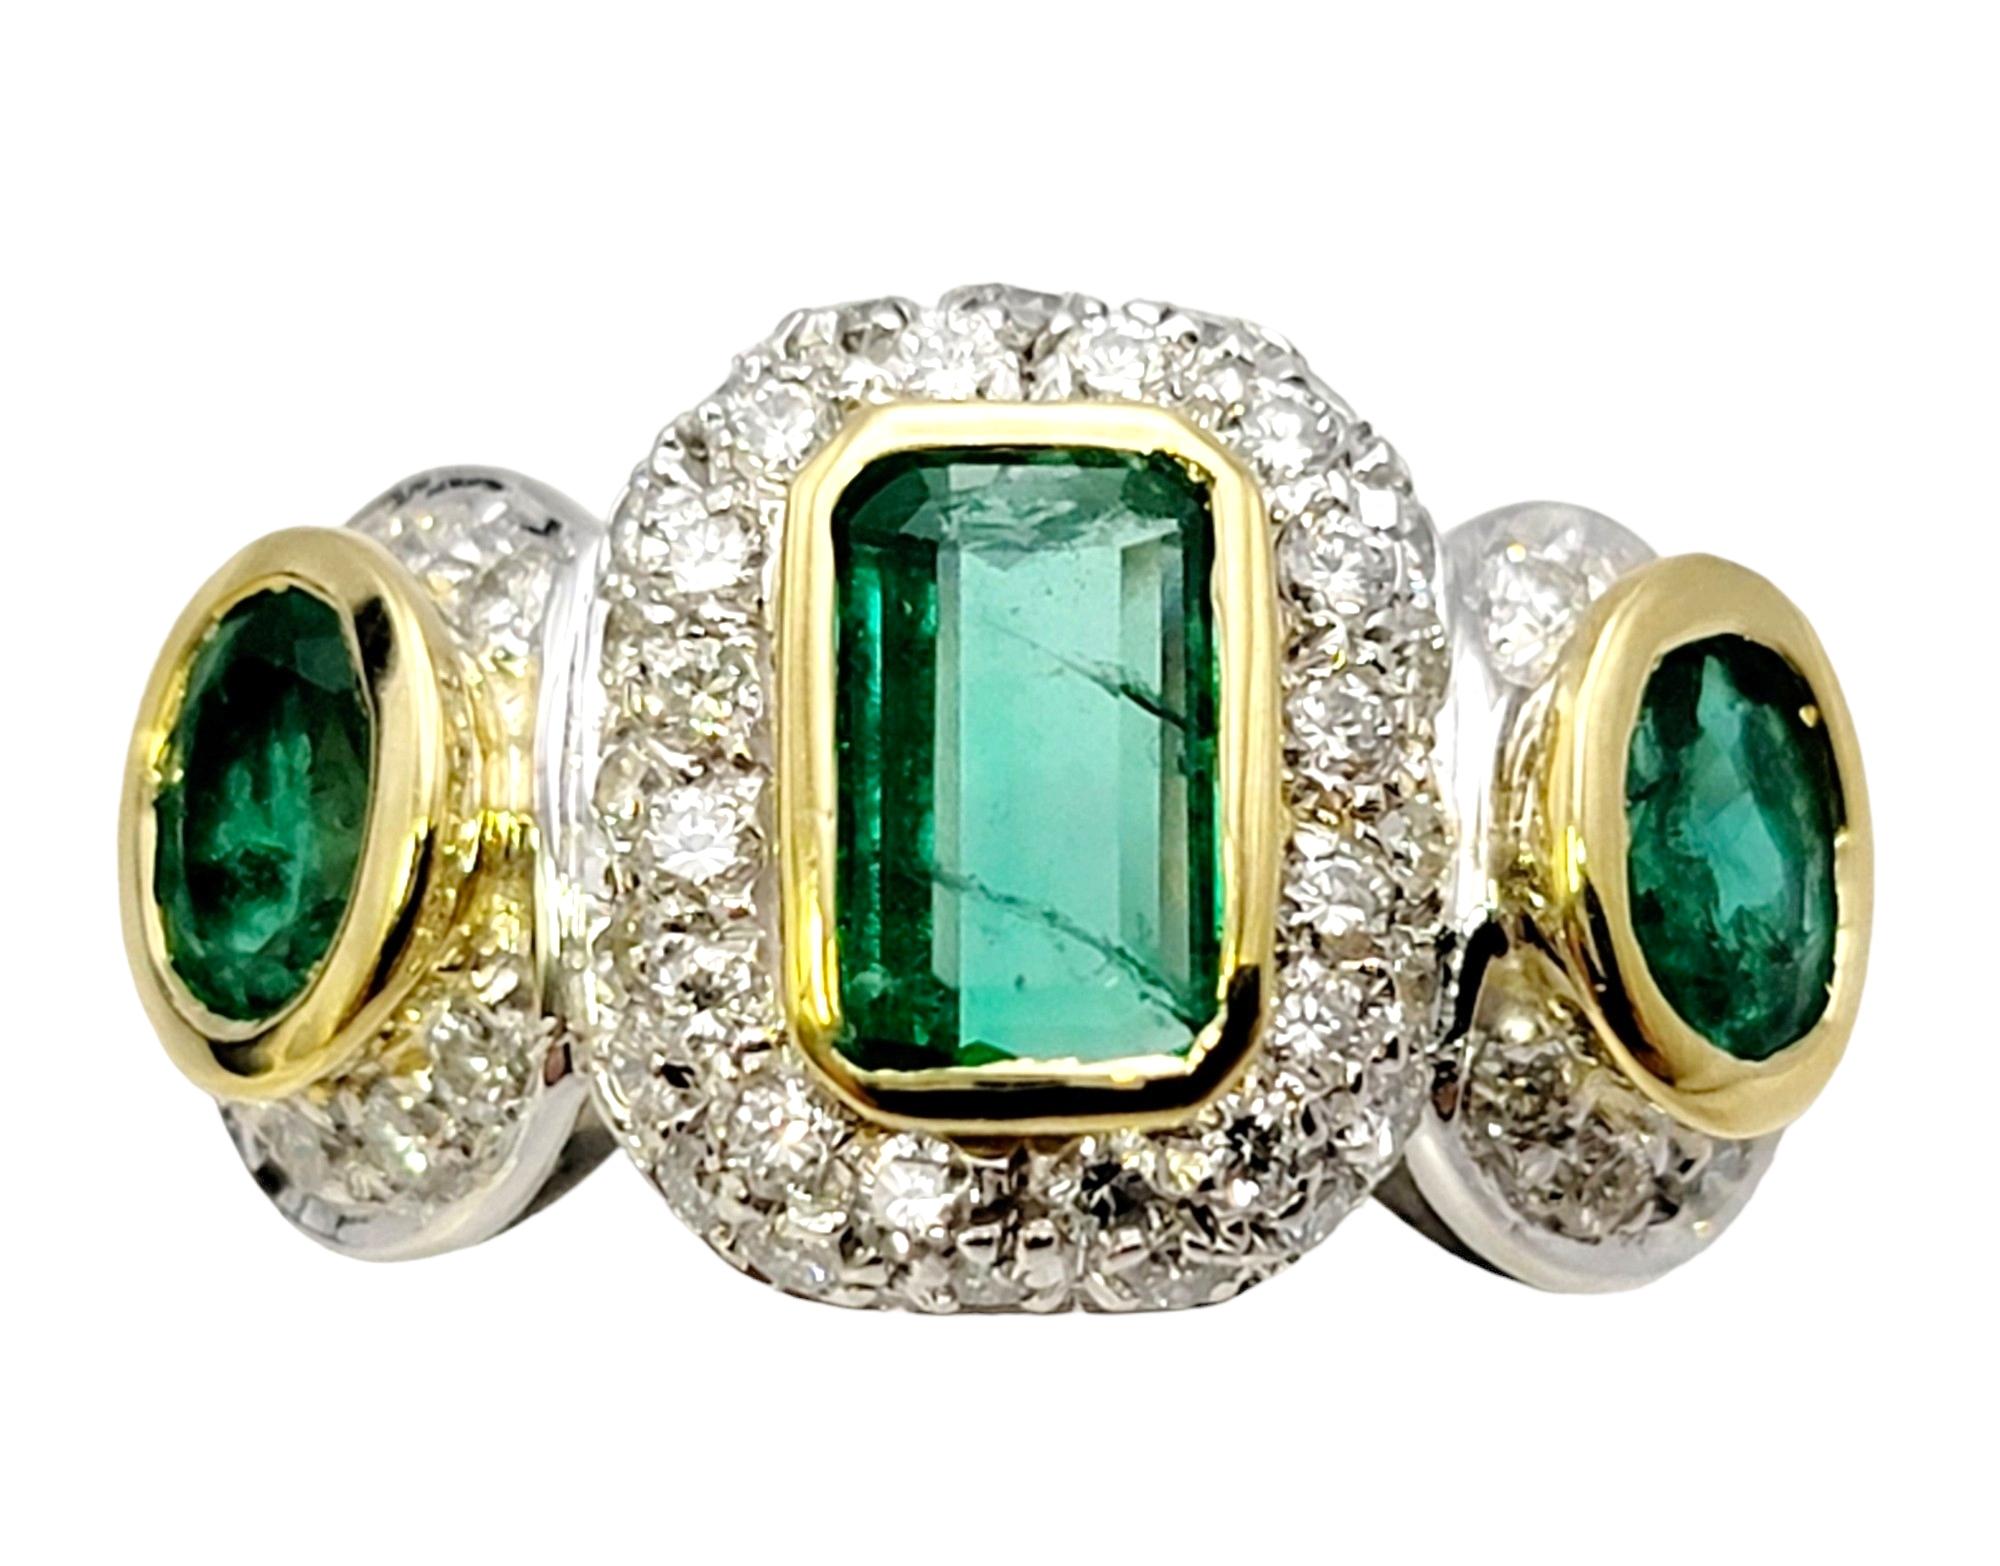 Ring size: 7

Bright and beautiful emerald three-stone ring with shimmering pave diamonds. Crafted in lustrous two-tone 18 karat gold, this ring showcases a captivating display of vibrant gemstones and dazzling diamonds, creating a truly mesmerizing